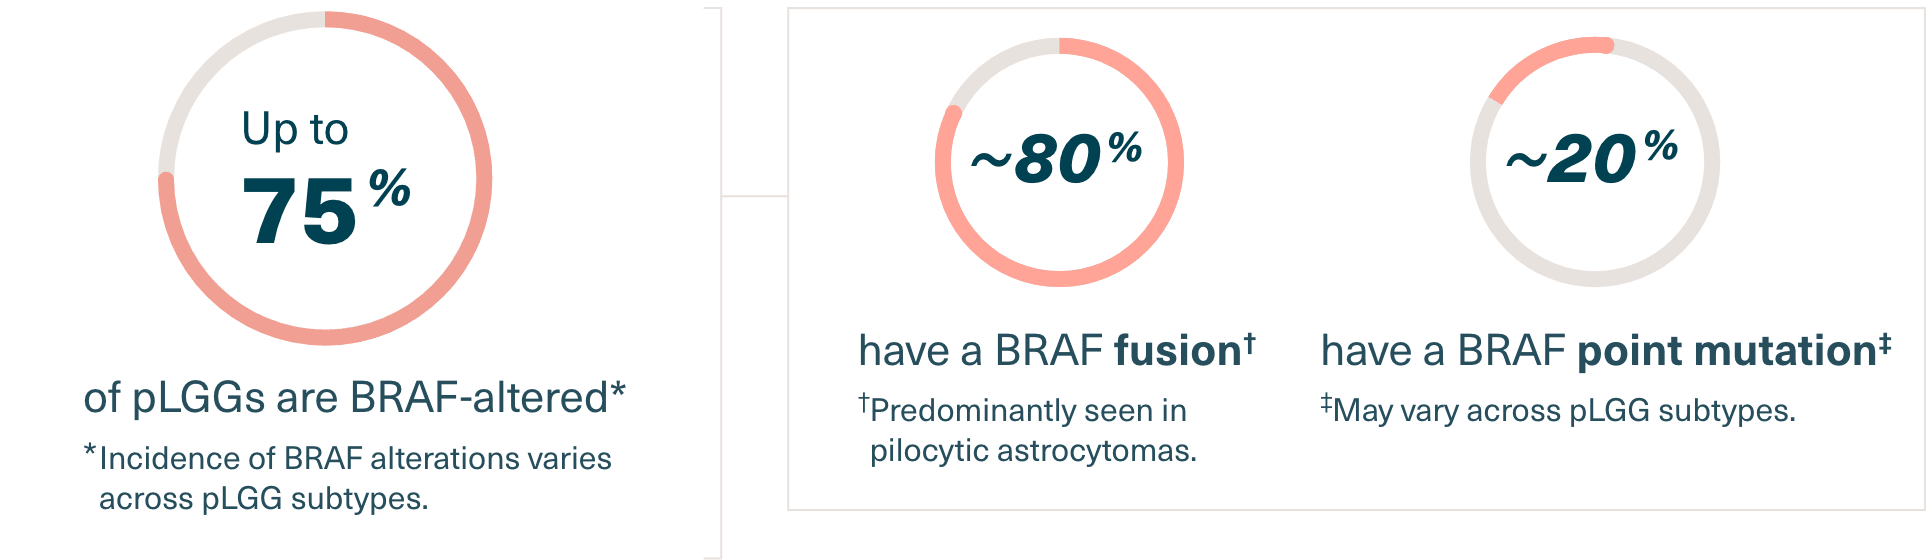 Infographics of pie chart percentages of pLGGs with BRAF fusions and mutations. Up to 75% of pLGGs are BRAF-altered. Incidence of BRAF alterations varies across pLGG subtypes. Of those with a BRAF alteration, nearly 80% have a BRAF fusion, predominantly seen in pilocytic astrocytomas. Nearly 20% have a BRAF point mutation. These may vary across subtypes.